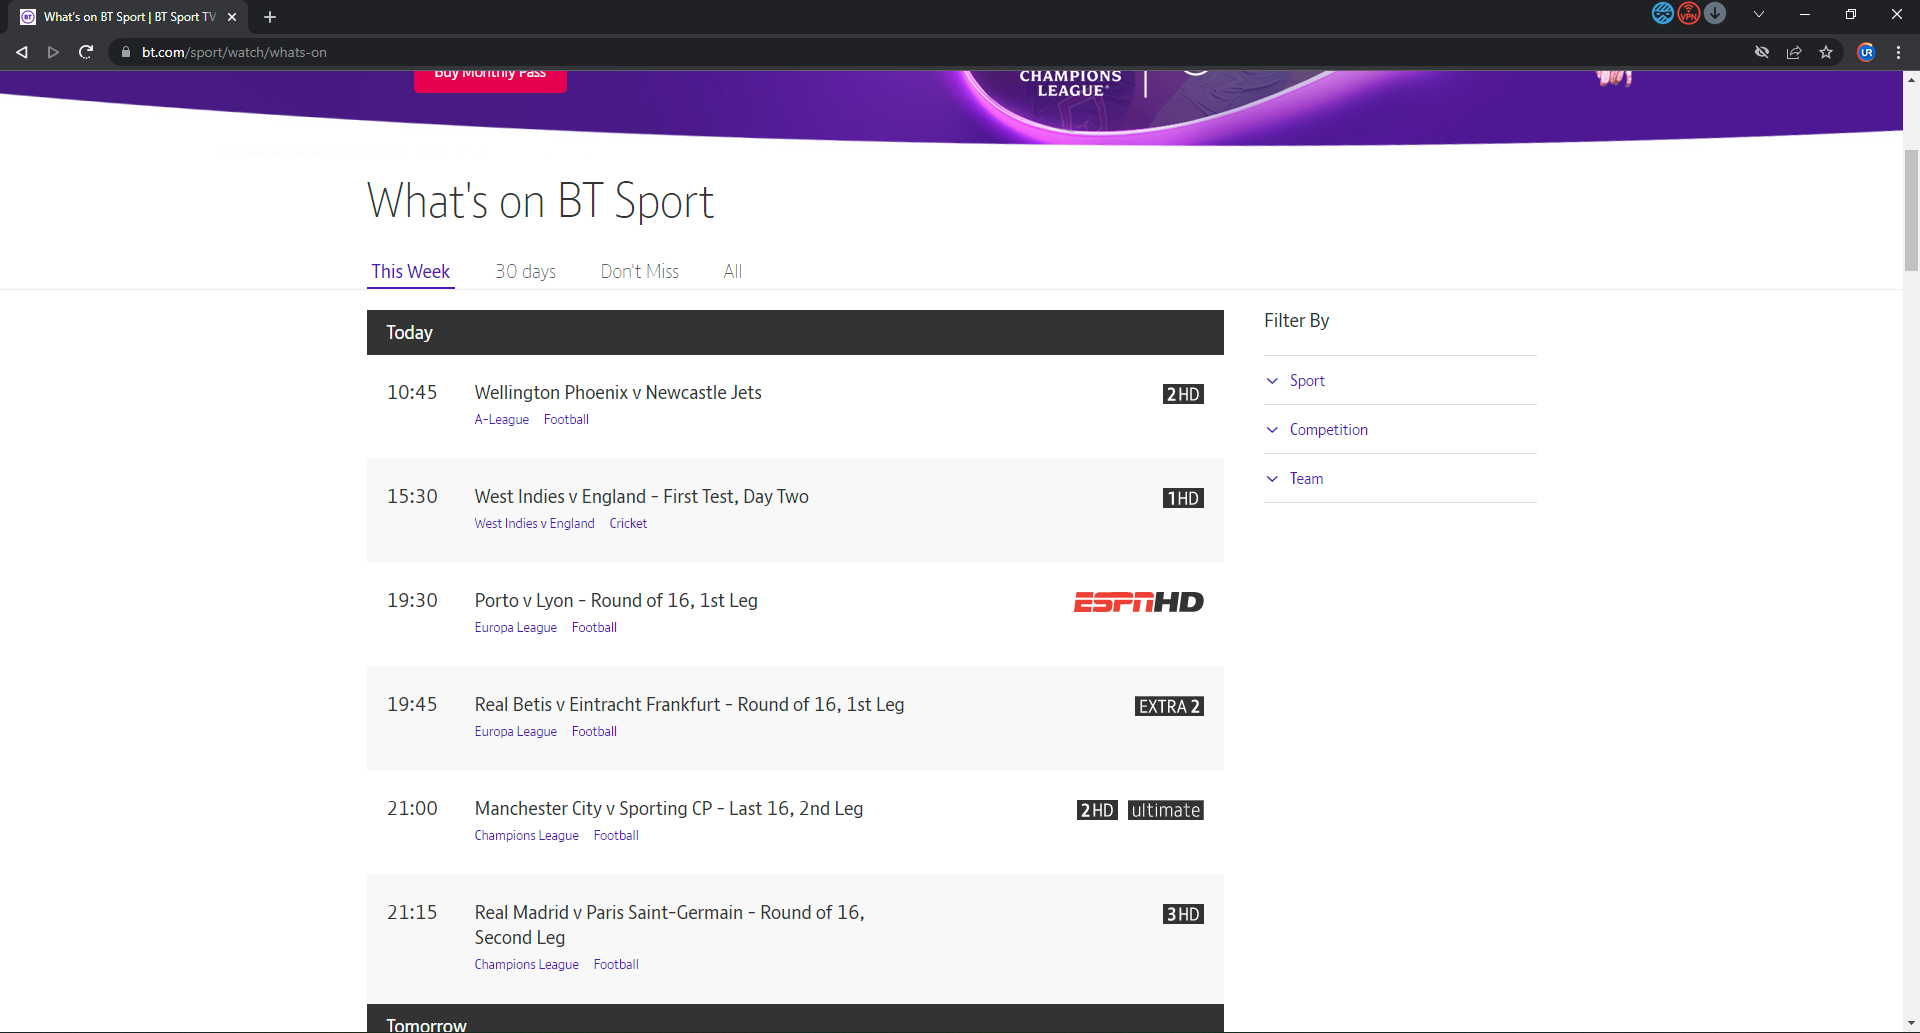 UR Browser is perfect for BT Sport.